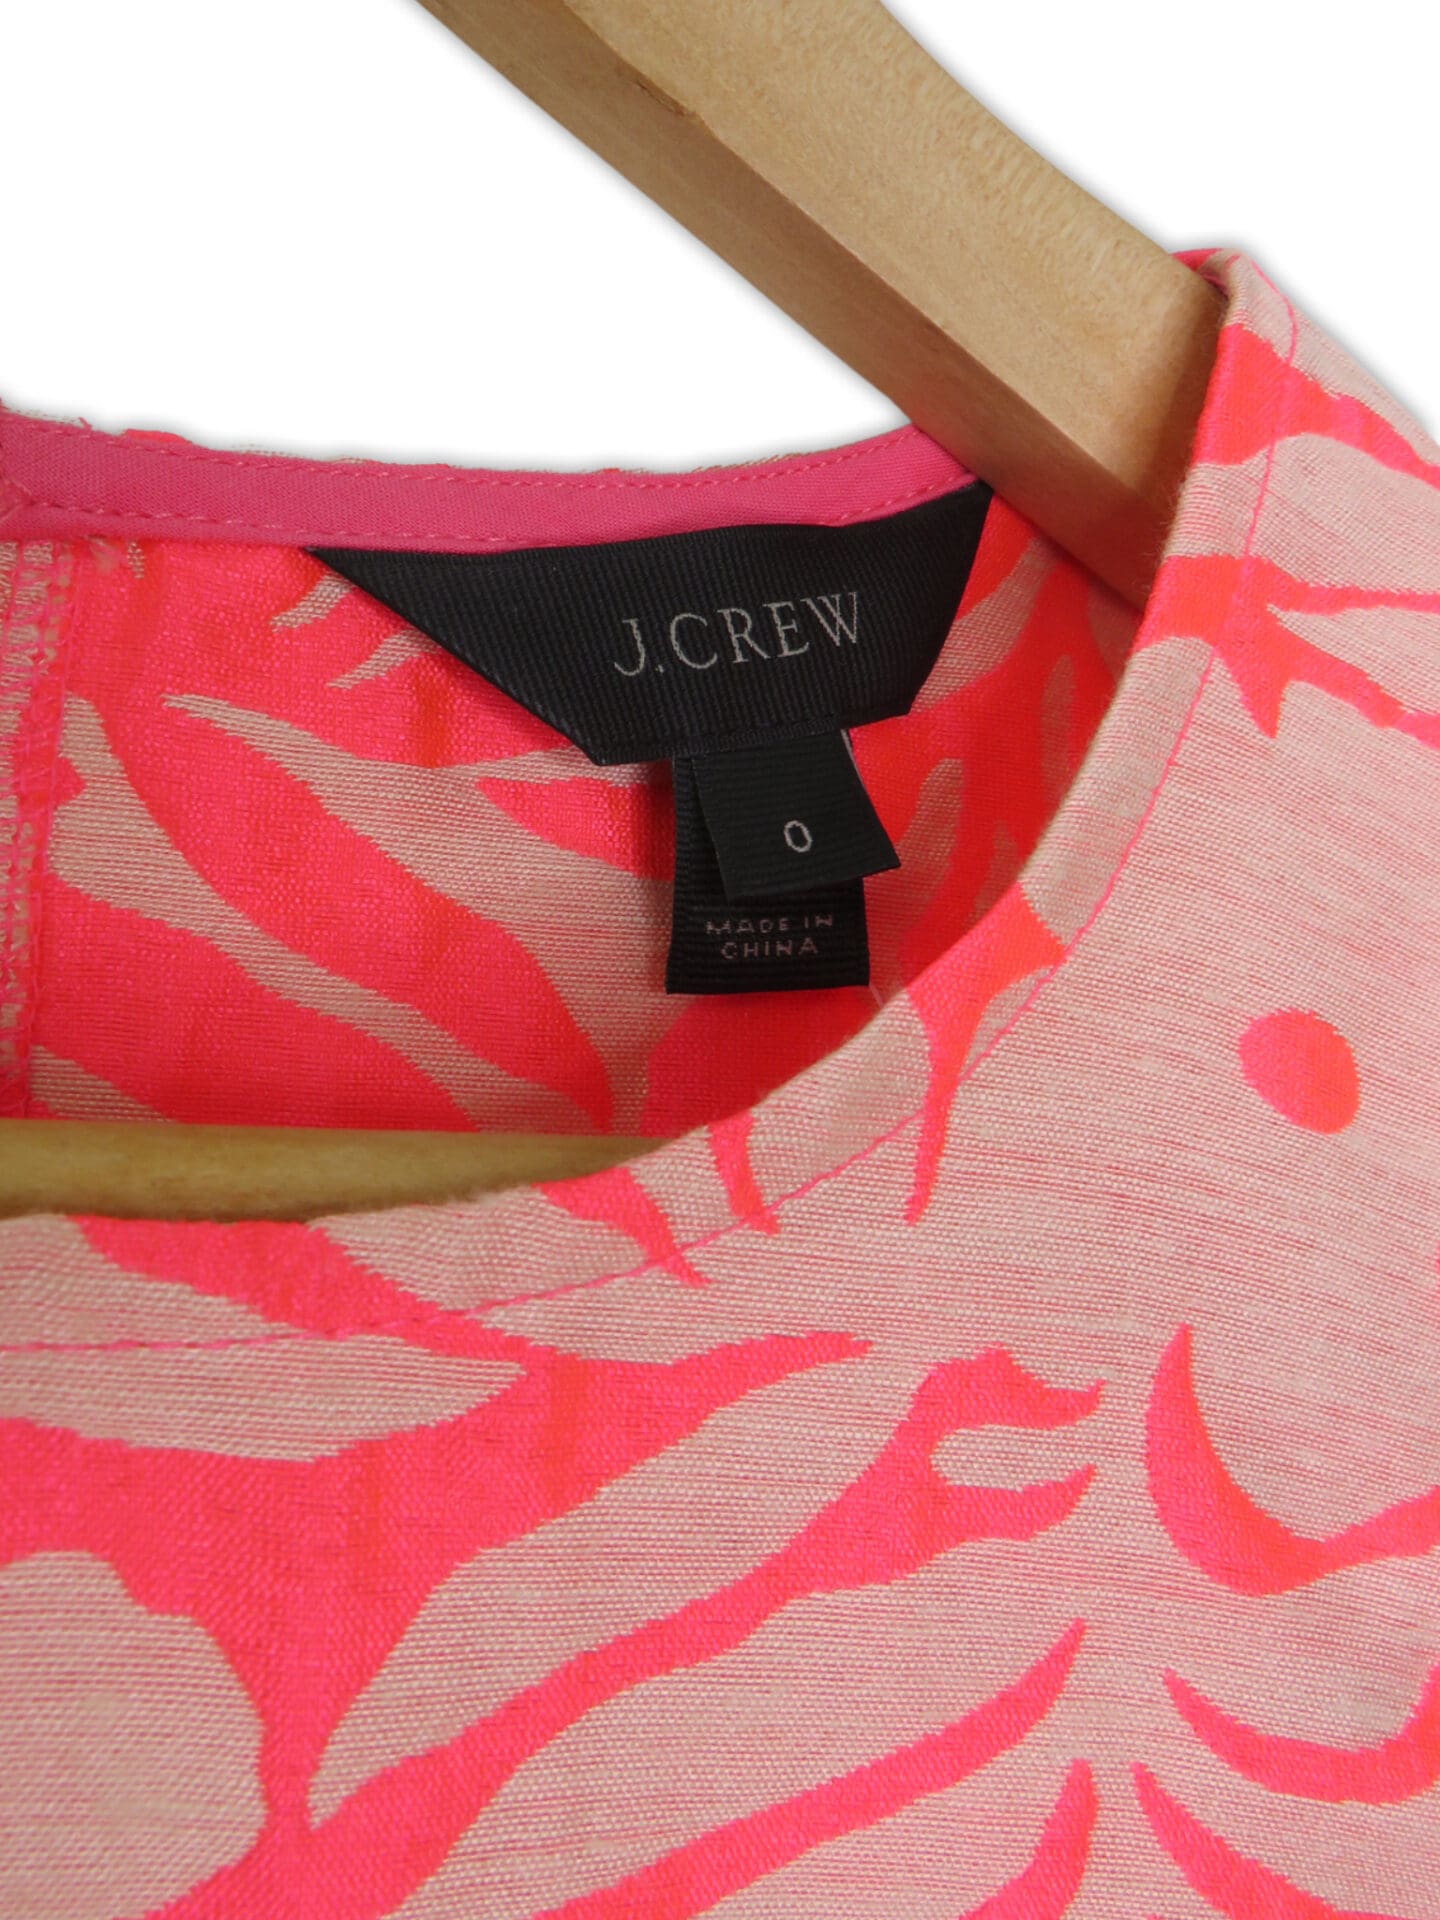 Fluorescent pink tank with rounded neck